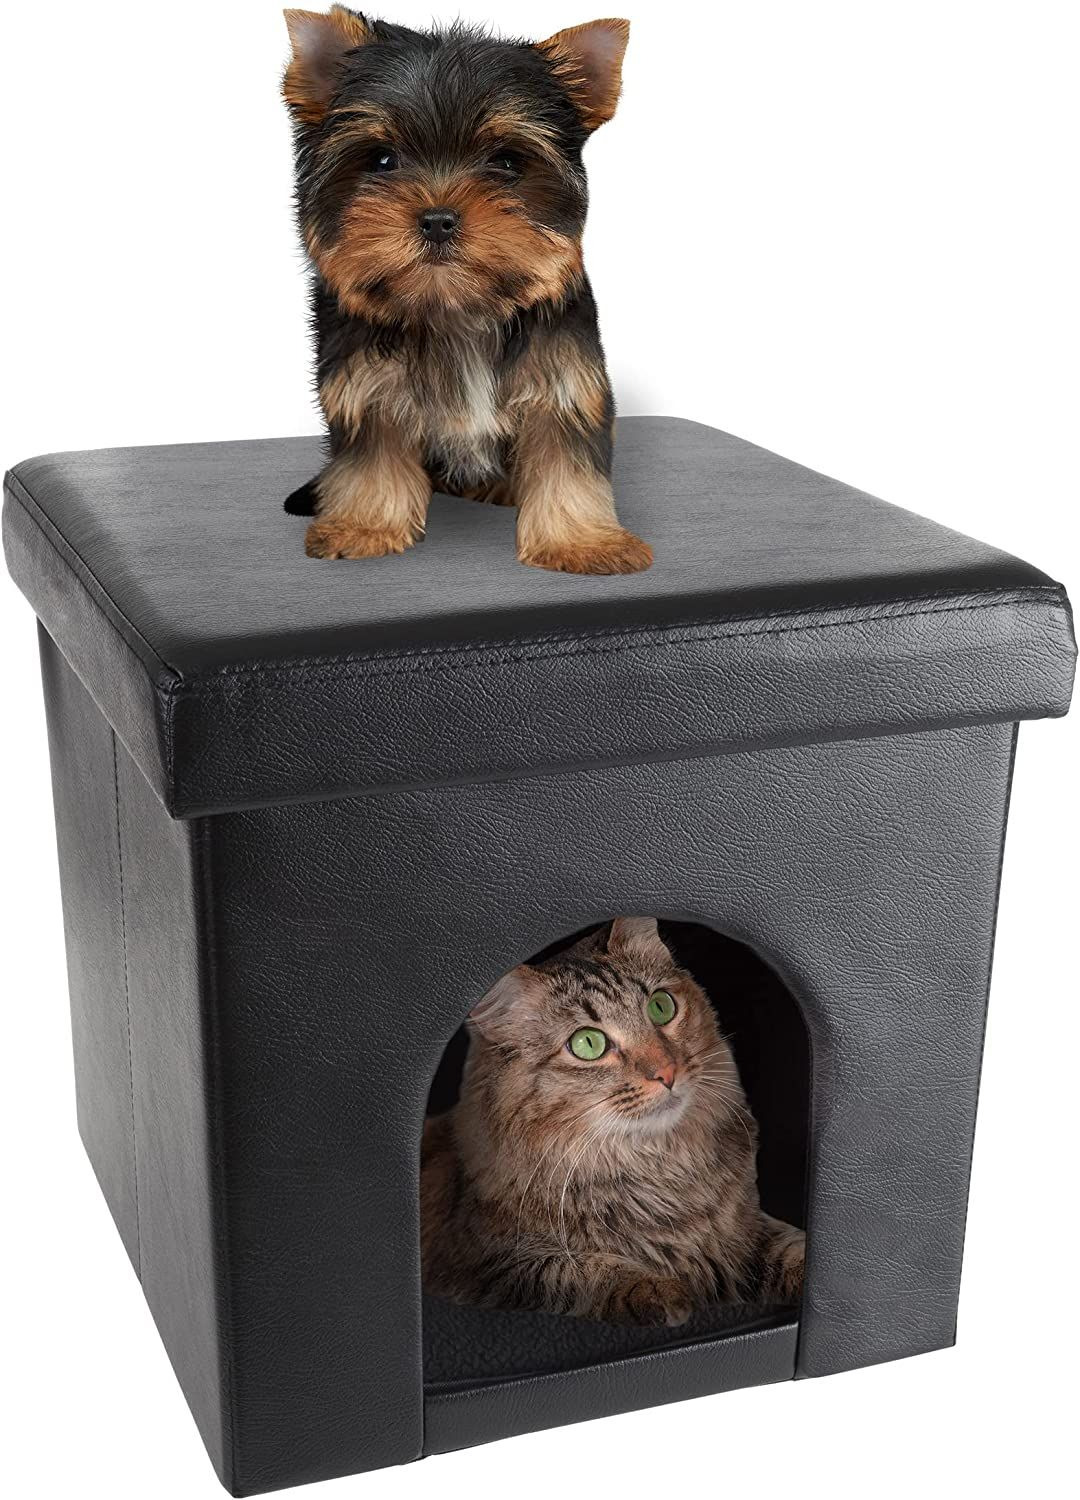 Cat House – Collapsible Multipurpose Small Dog or Ottoman with Black 